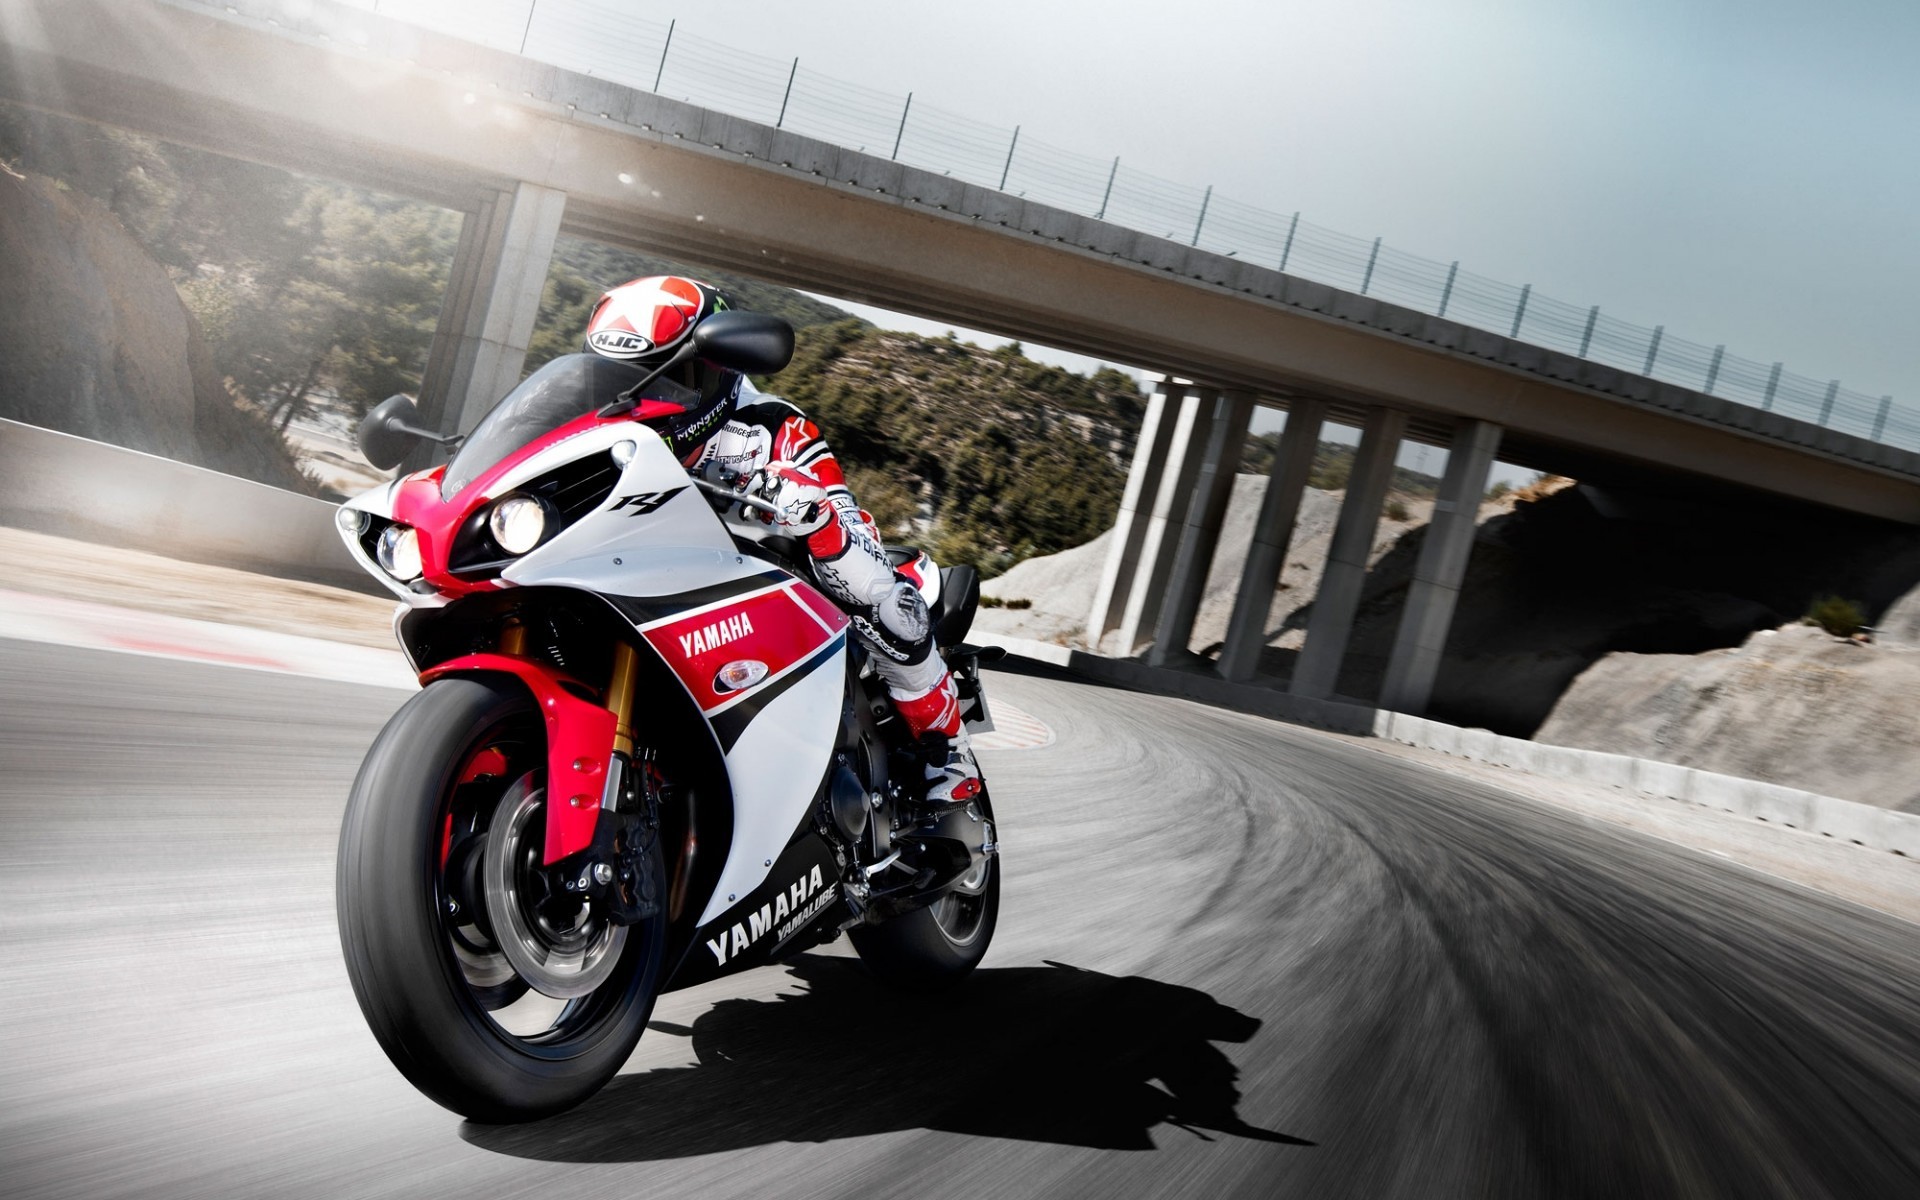 Yamaha Yzf-r1, Racing, Motorcycle, Road, White, Red - Yamaha R1 2012 , HD Wallpaper & Backgrounds